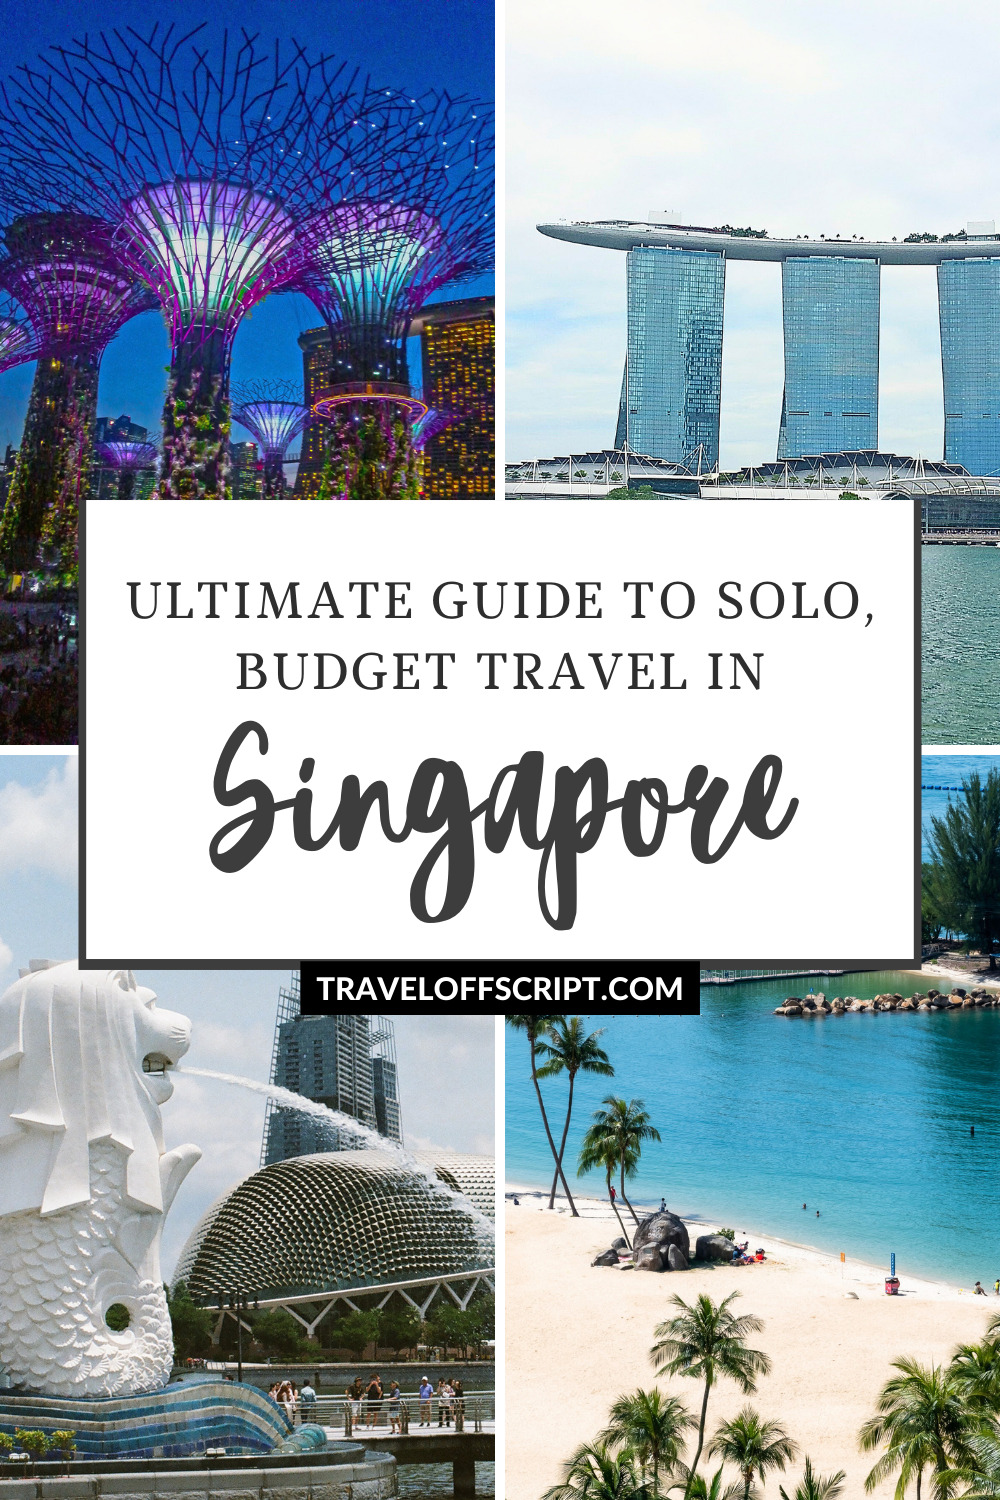 Ultimate guide to solo budget travel in SIngapore - Pinterest - traveloffscript